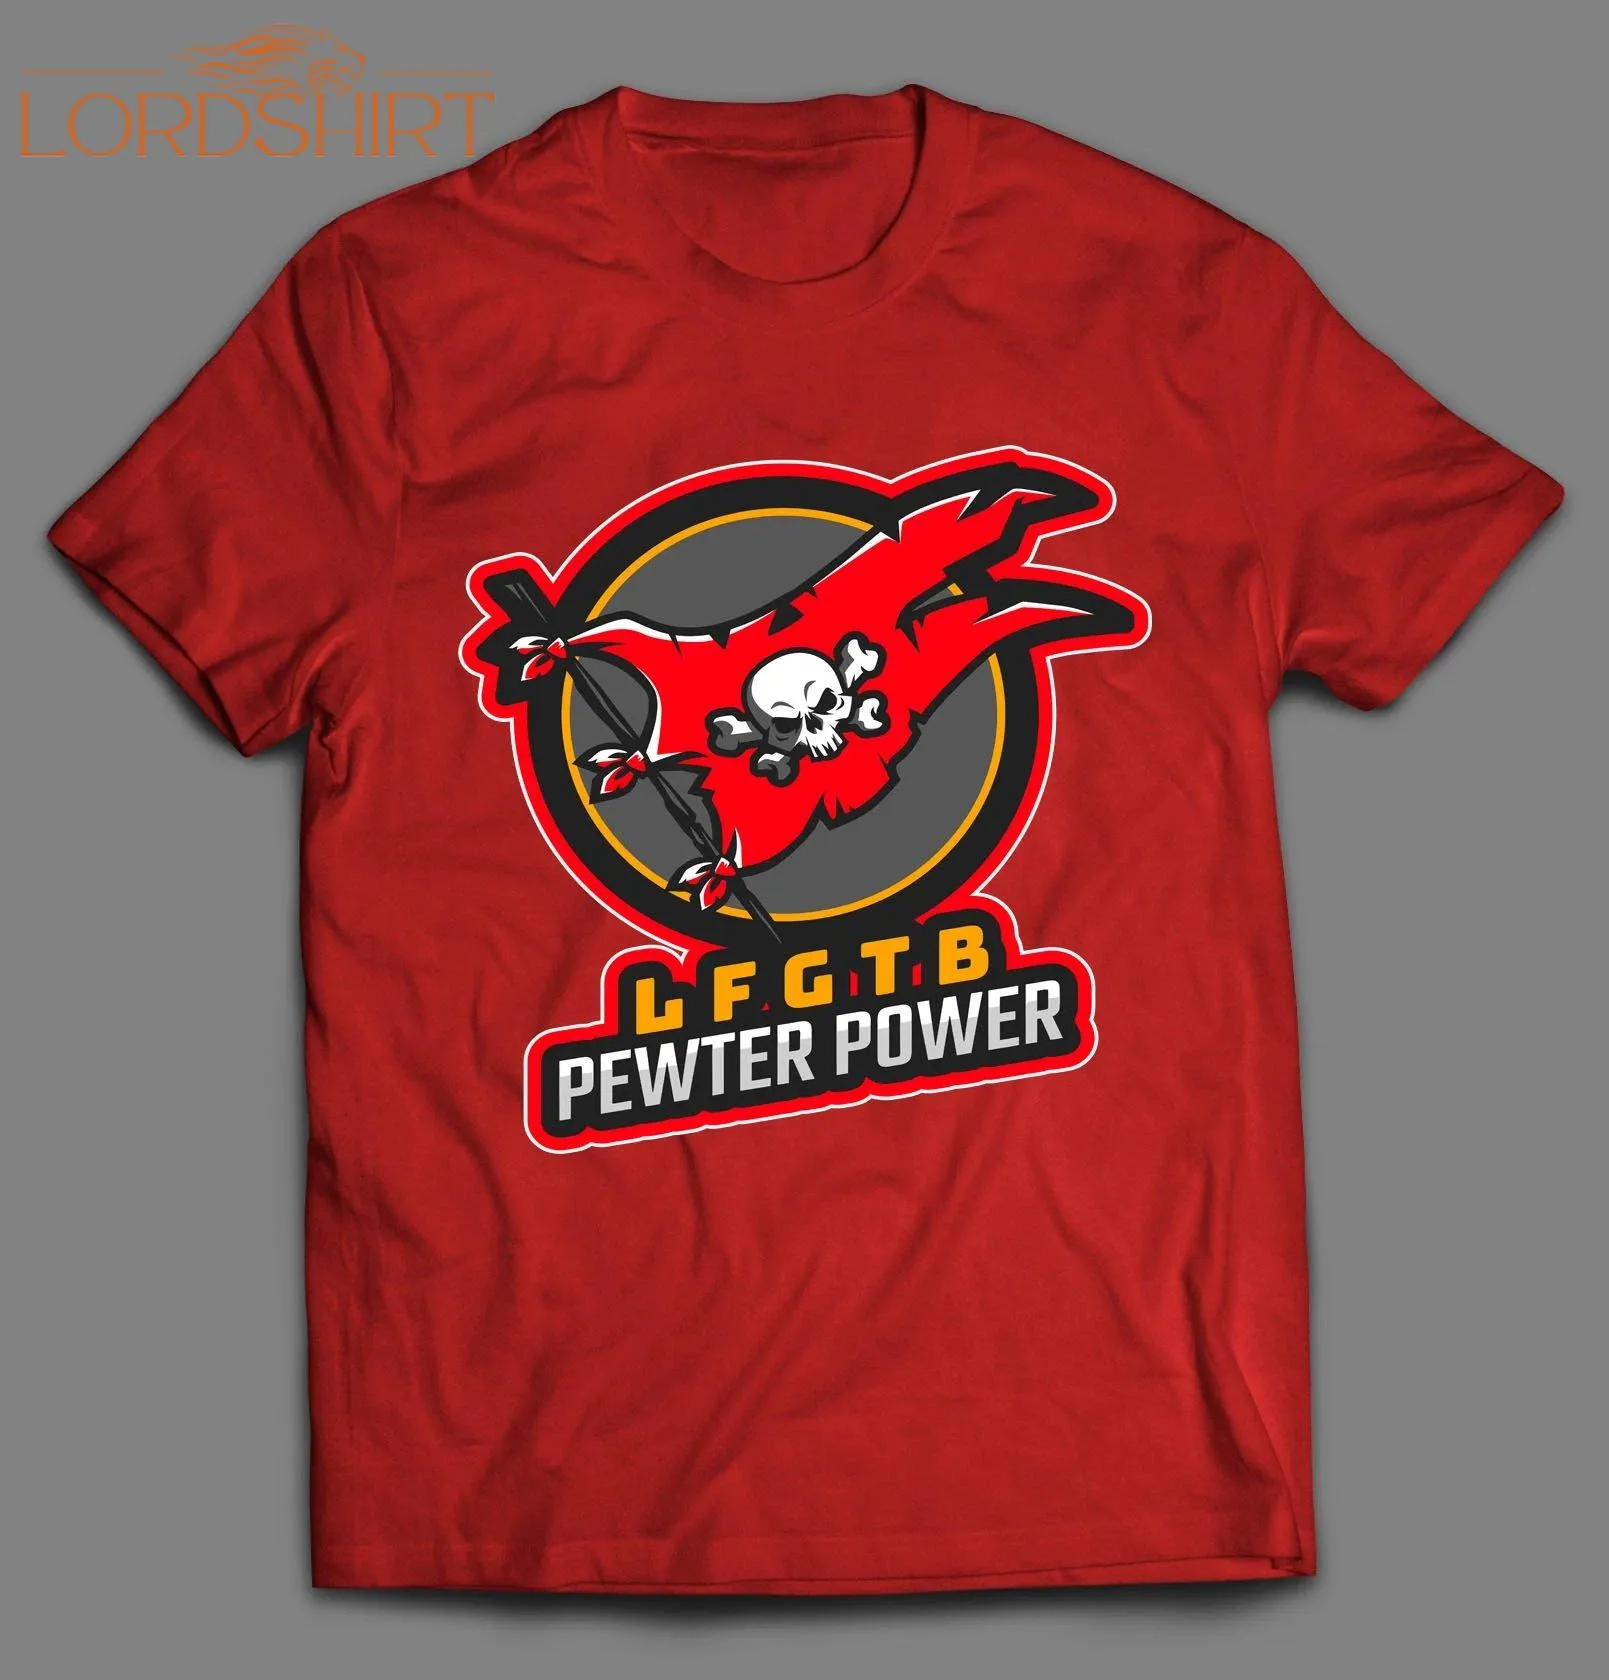 Let's F*cking Go T.b. Pewter Power Playoffs Shirt